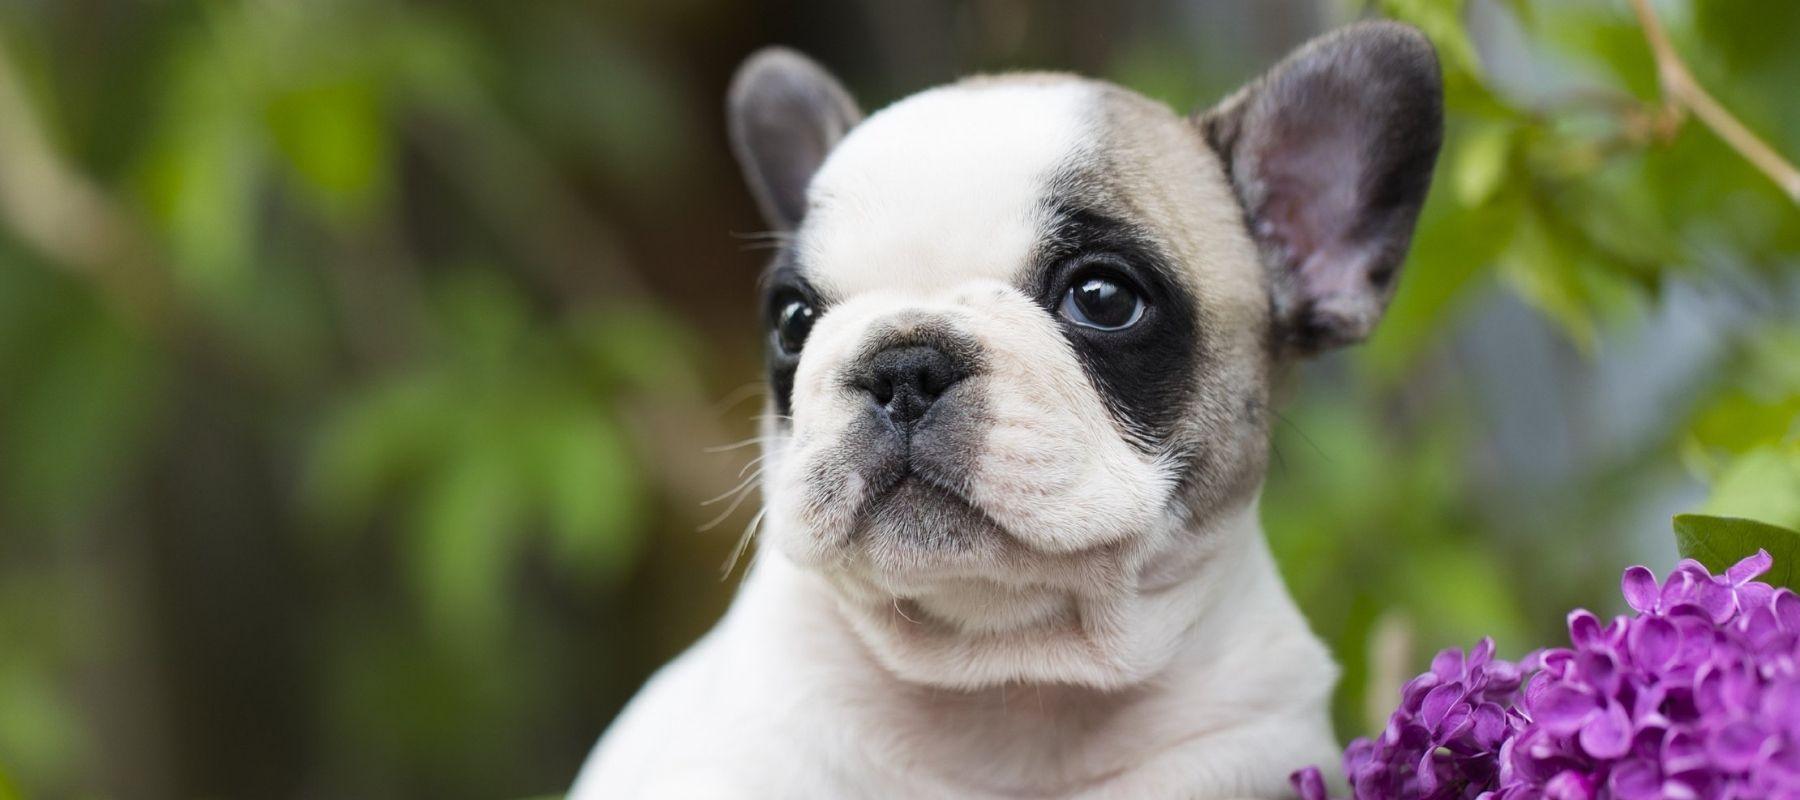 How To Help Your Lilac French Bulldog Manage Separation Anxiety - Calming Dog